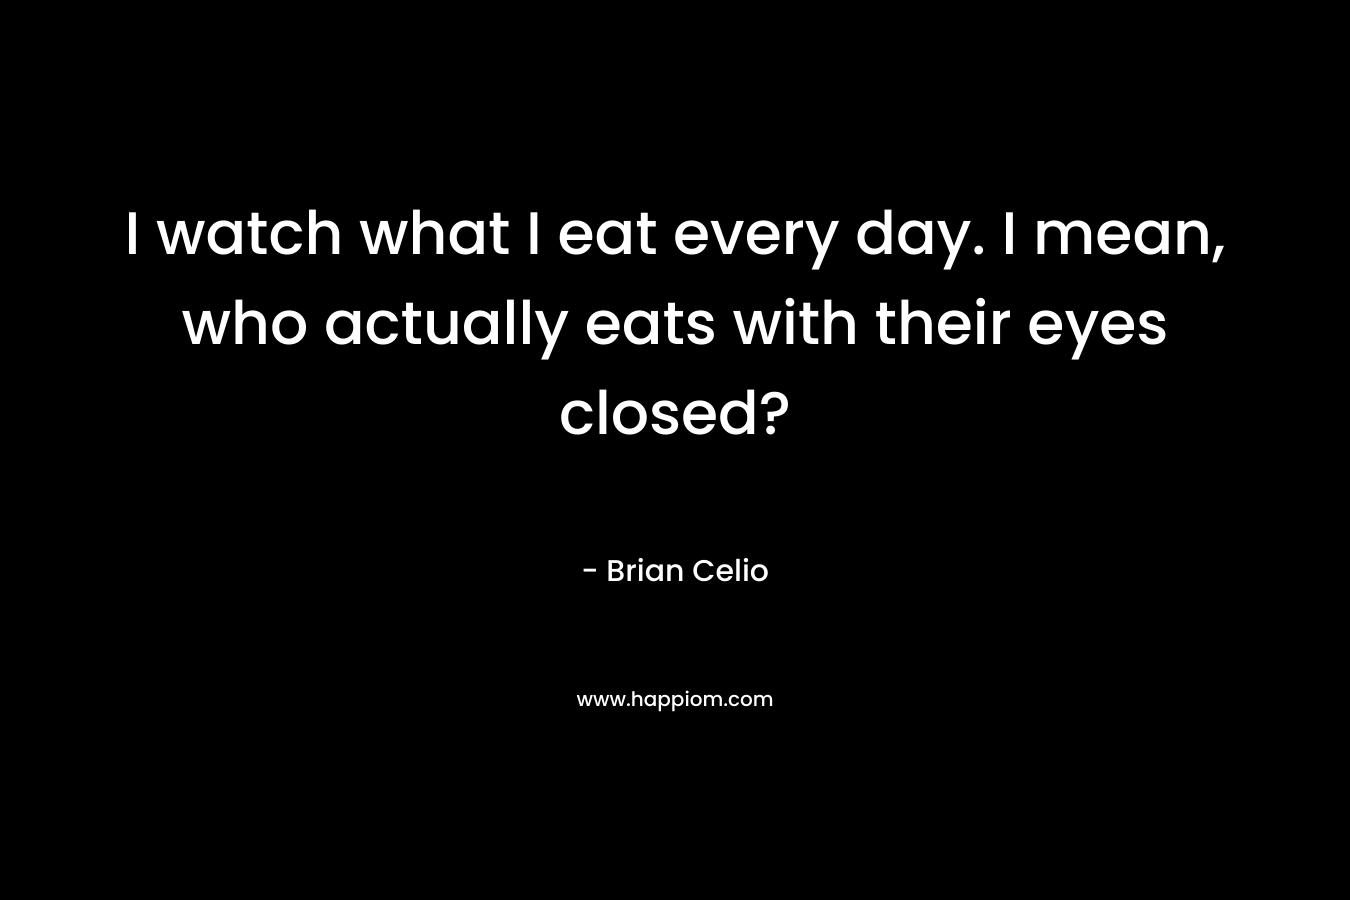 I watch what I eat every day. I mean, who actually eats with their eyes closed? – Brian Celio